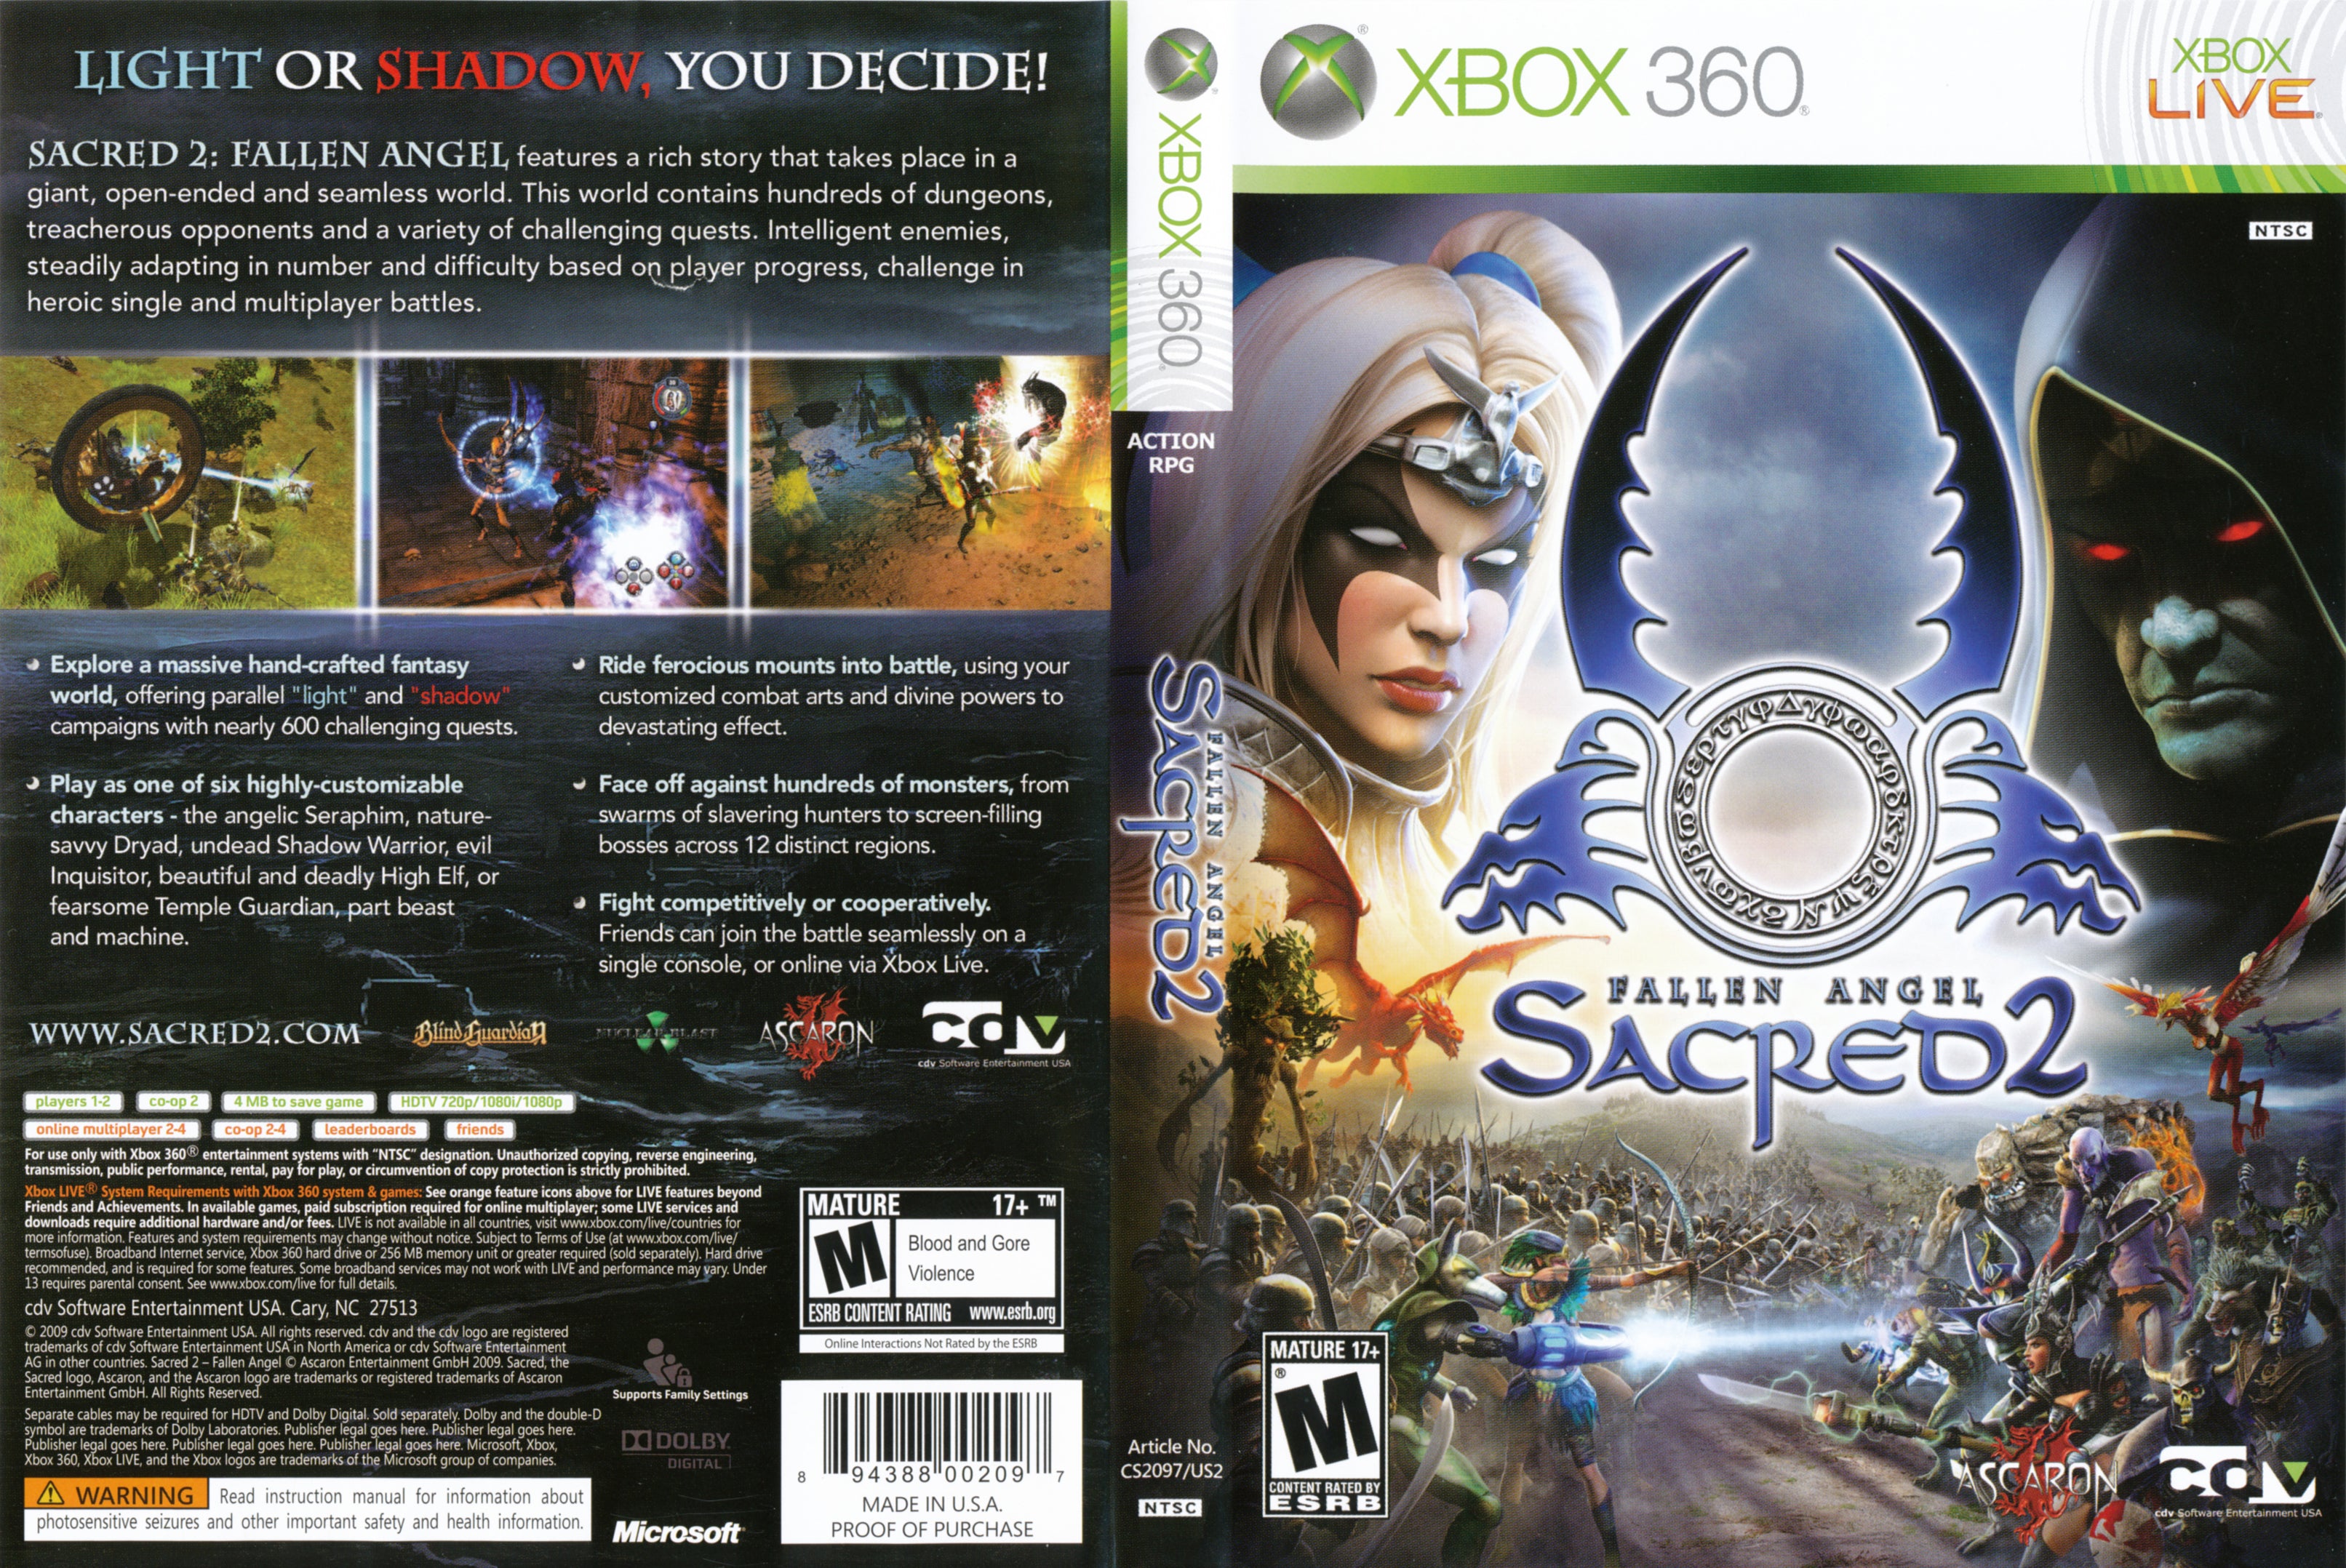 Sacred 3: First Edition for Xbox360